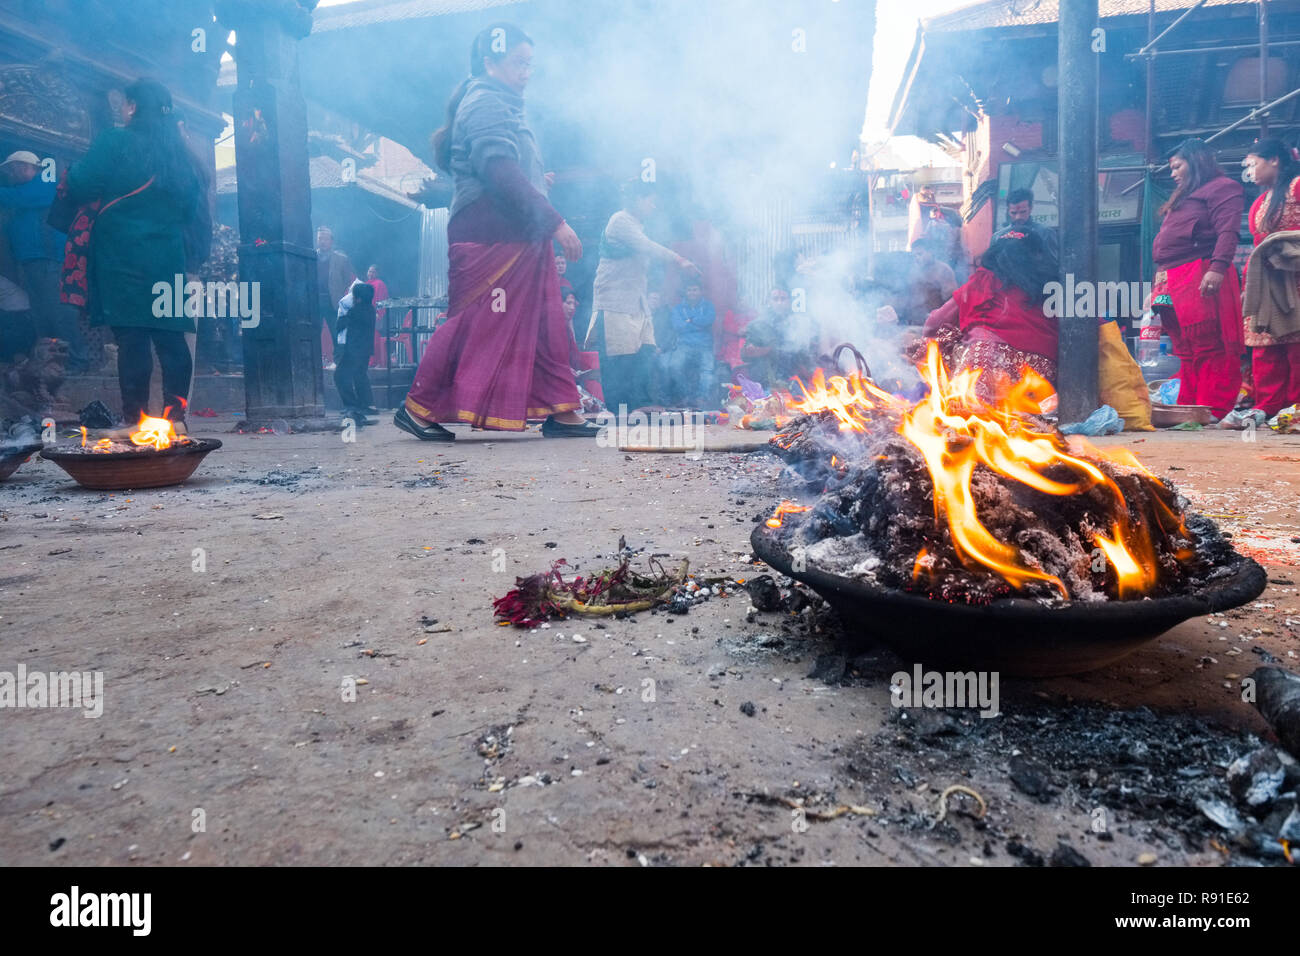 Smoke and flames of offerings at a Hindu temple in Patan, Nepal Stock Photo